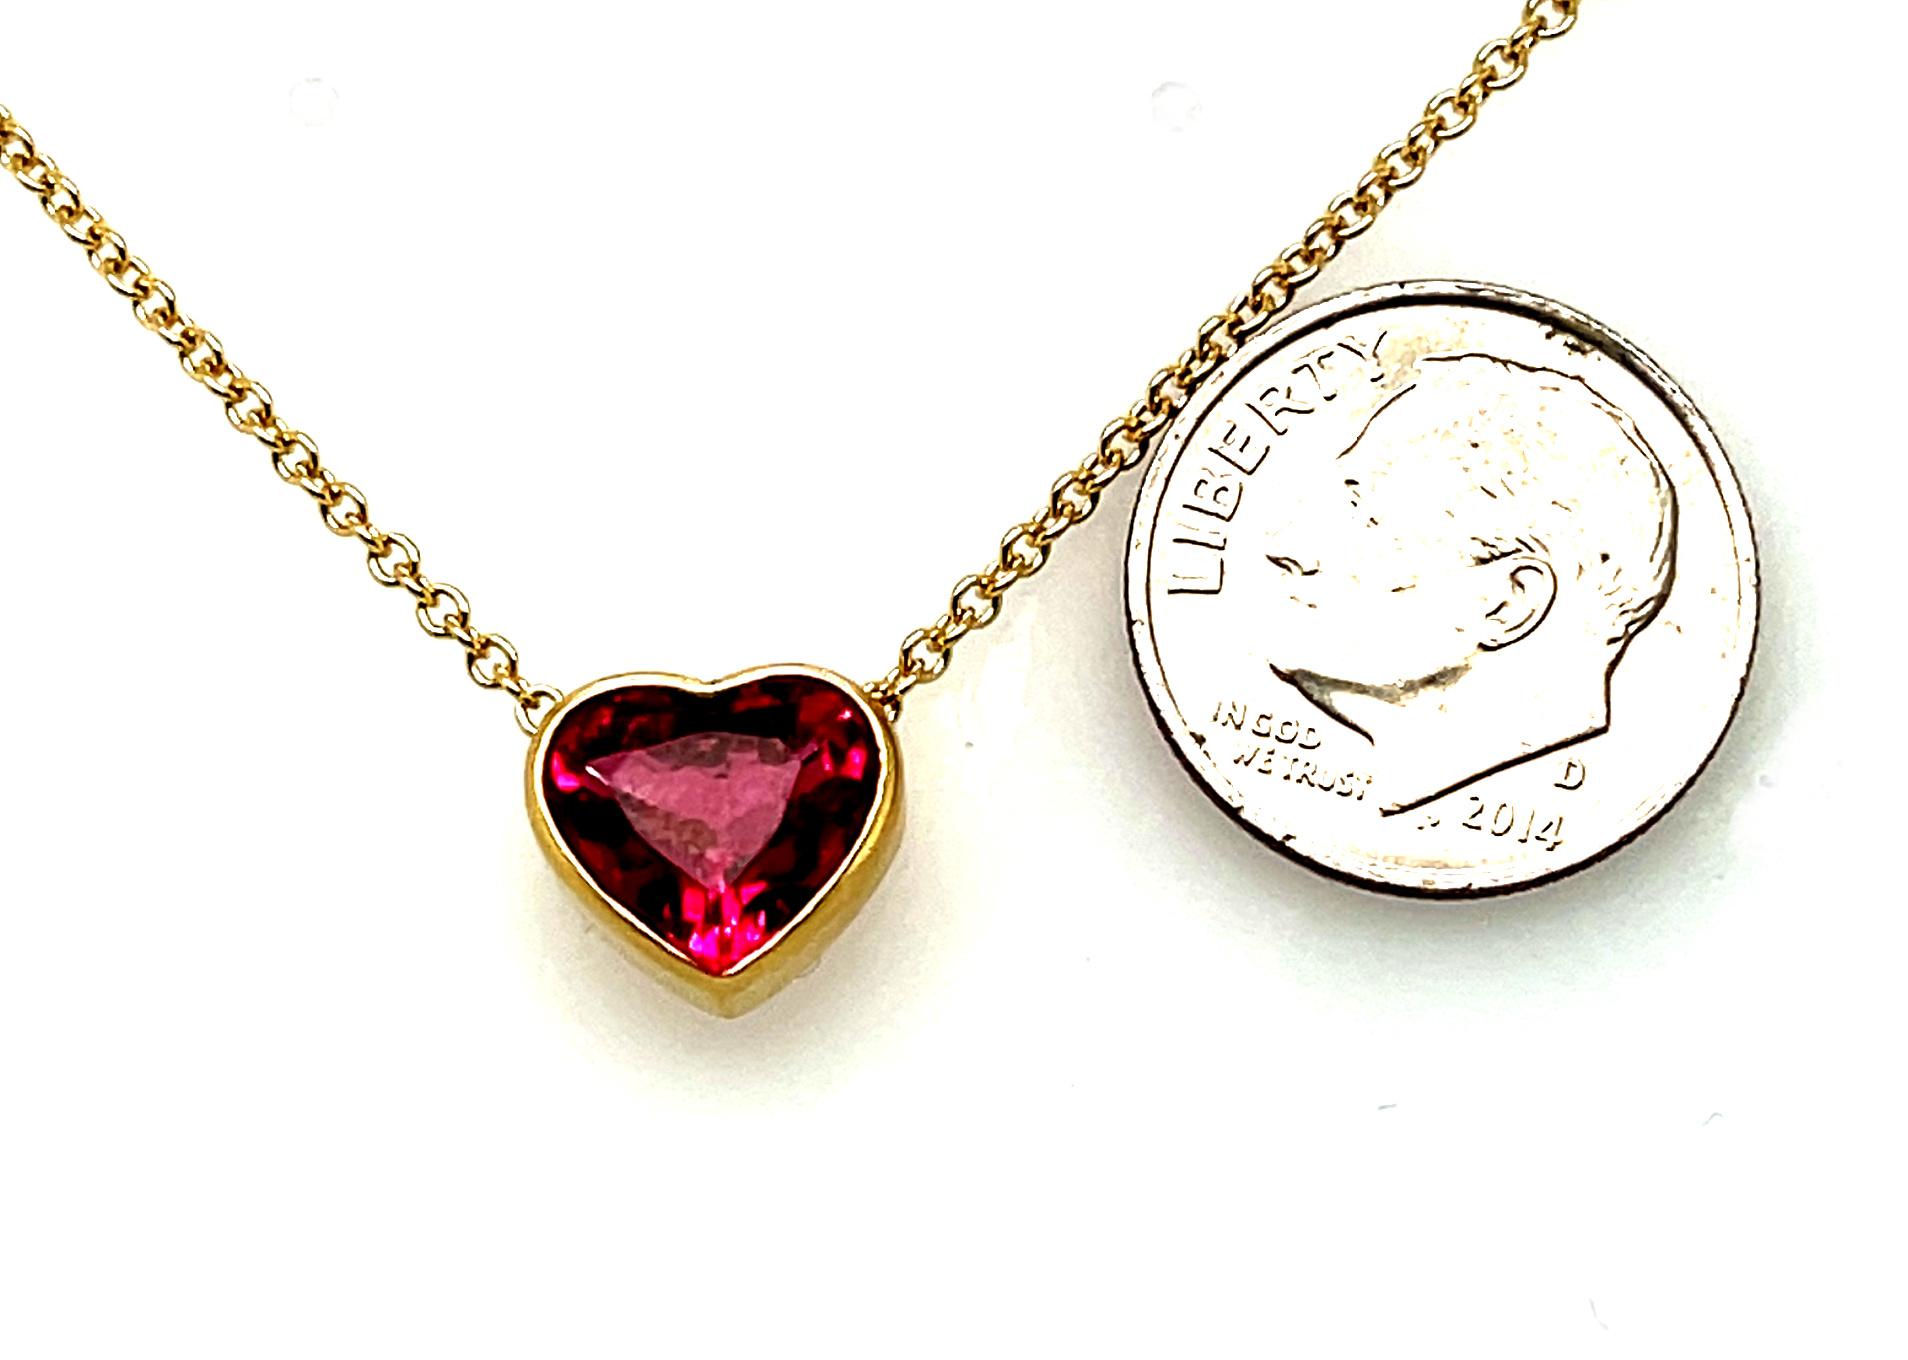 1.99 Carat Heart Shaped Pink Rubellite Tourmaline Necklace in 18k Yellow Gold For Sale 1